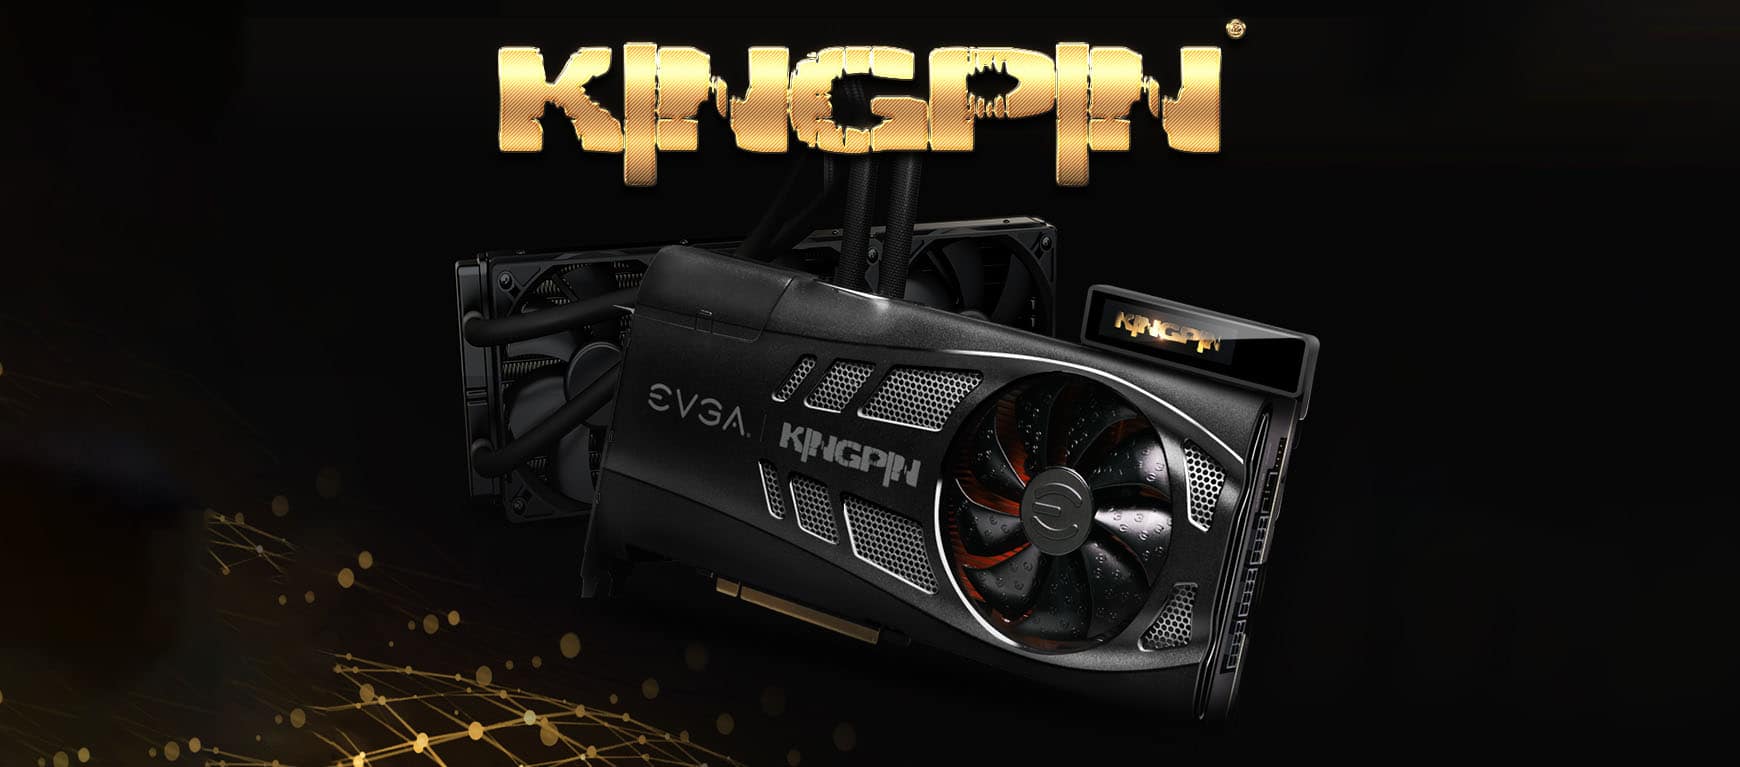 Insanity of price and consumption for the EVGA GeForce RTX 3090 Ti Kingpin